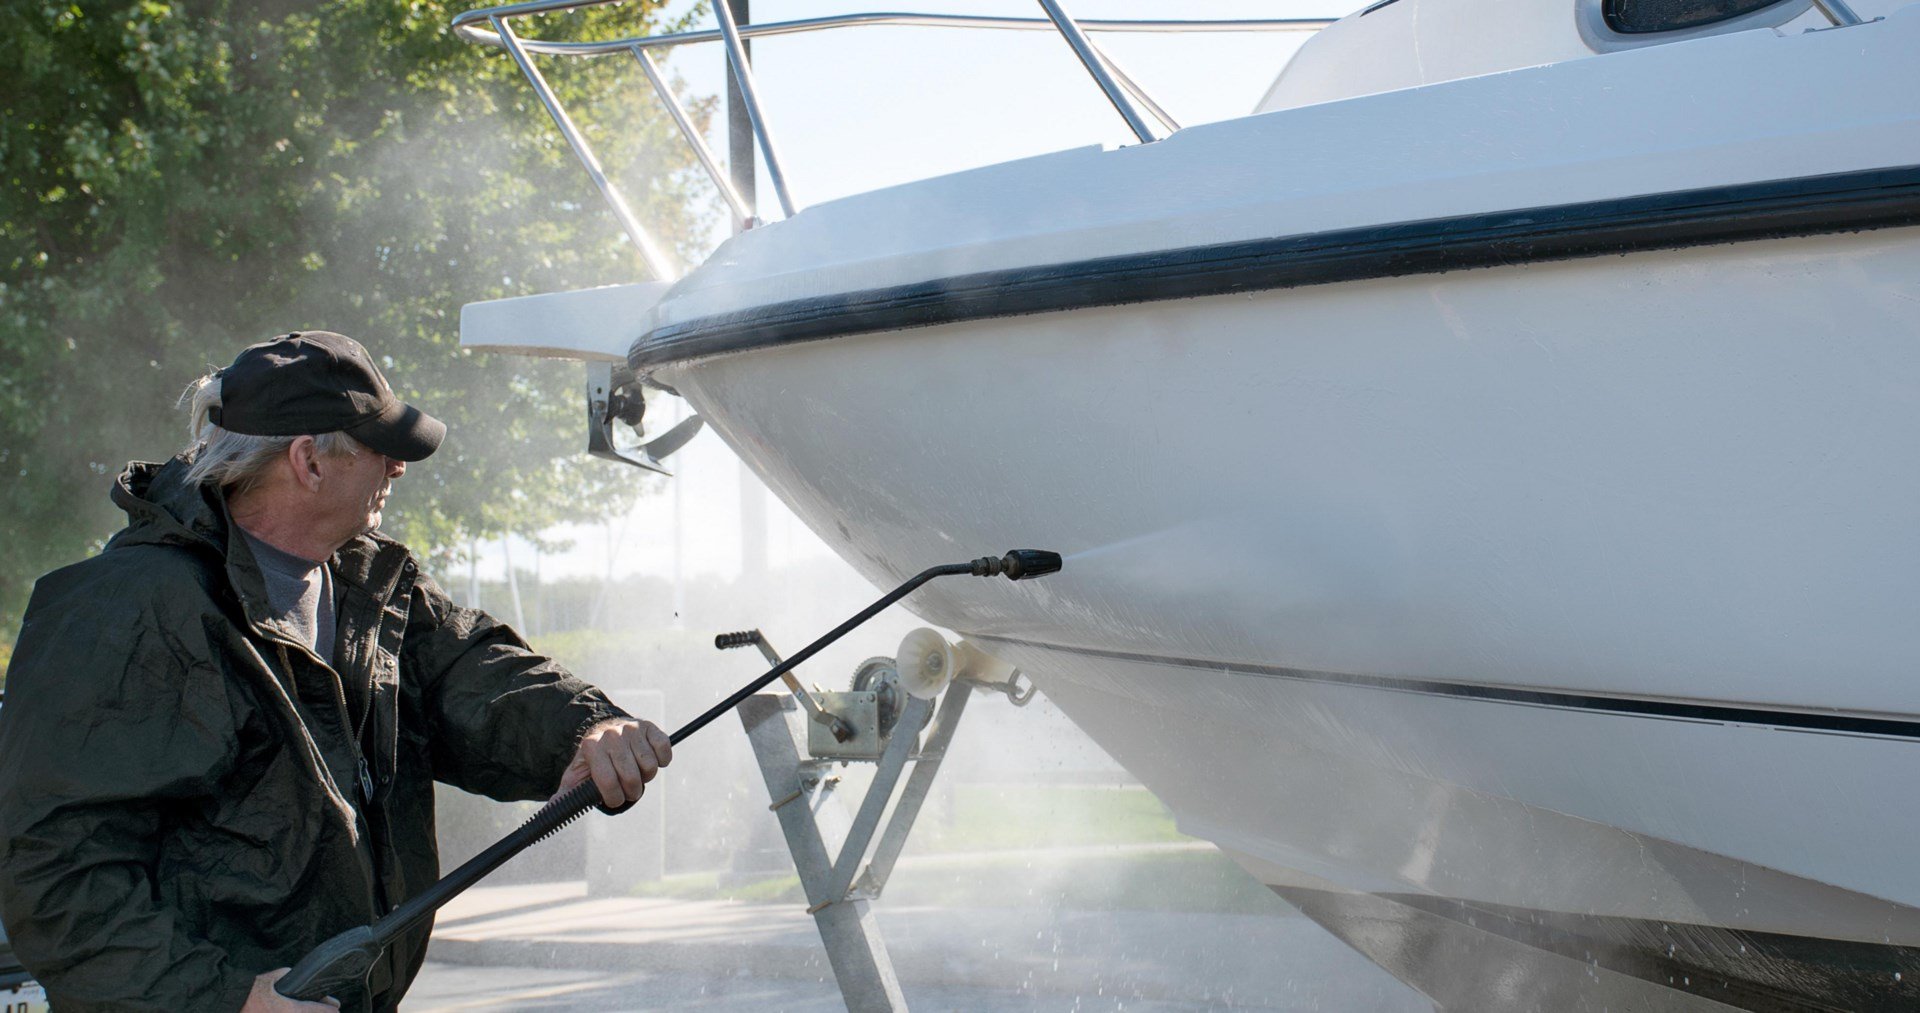 A man using a pressure water to clean a white boat